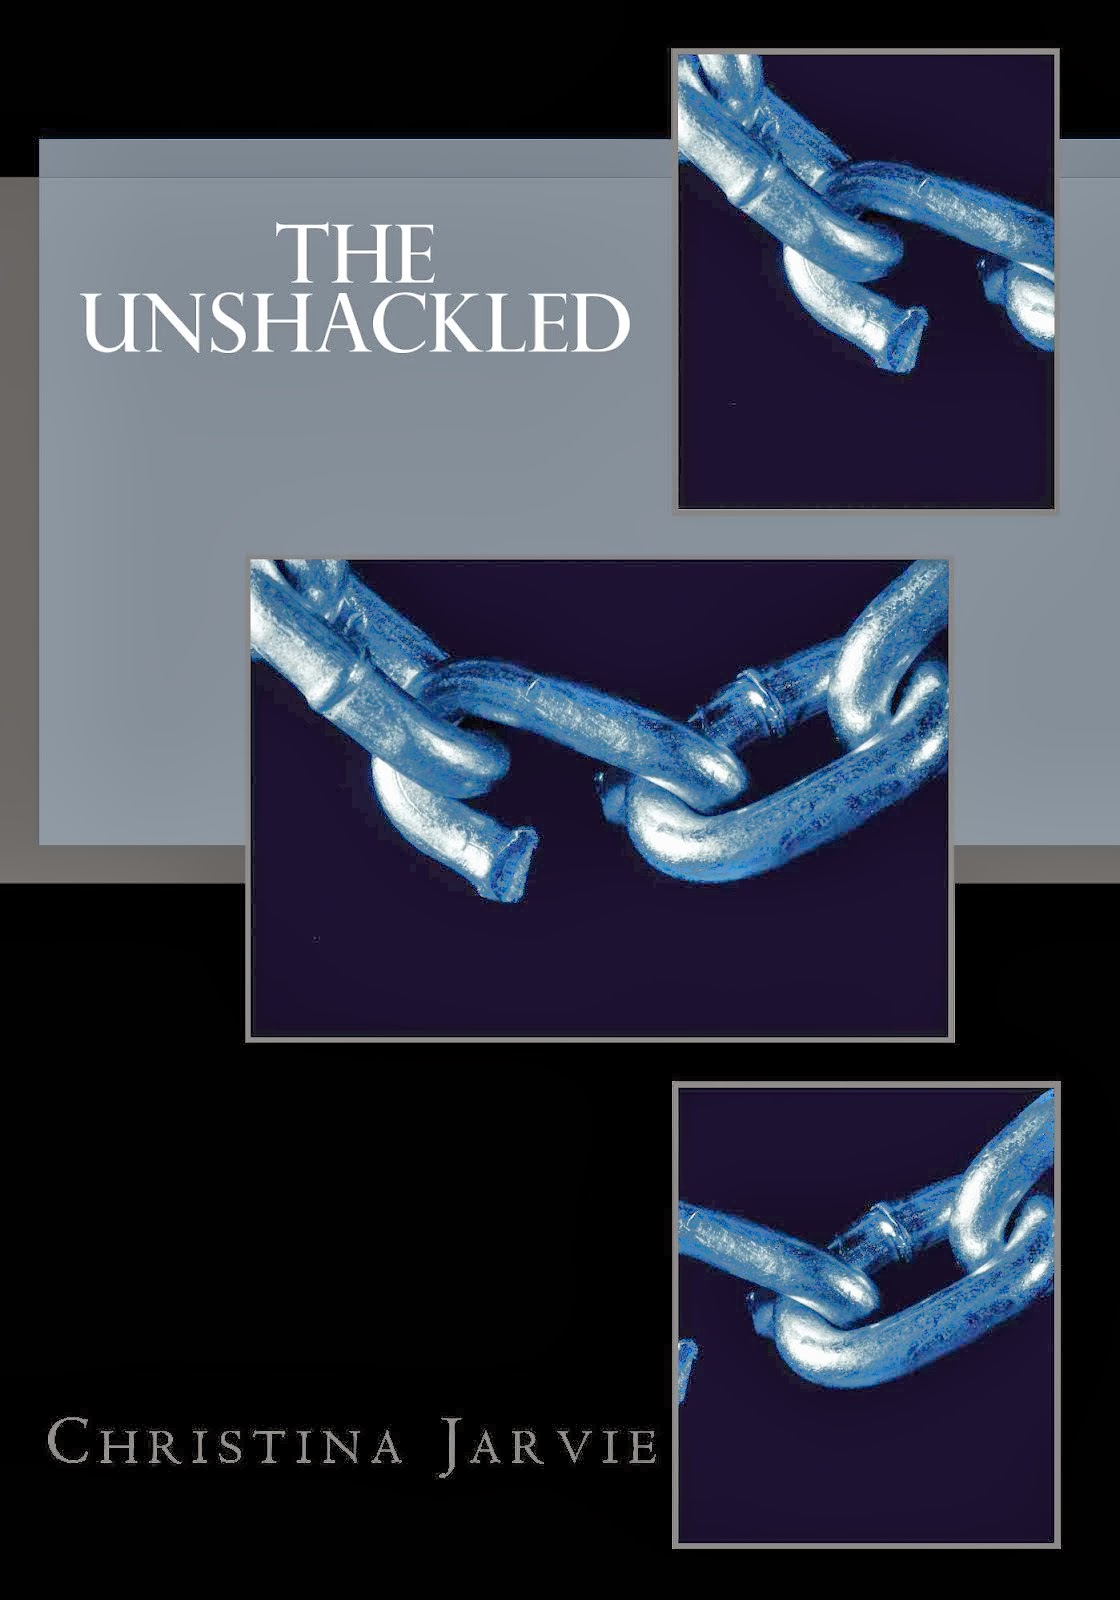 The Unshackled